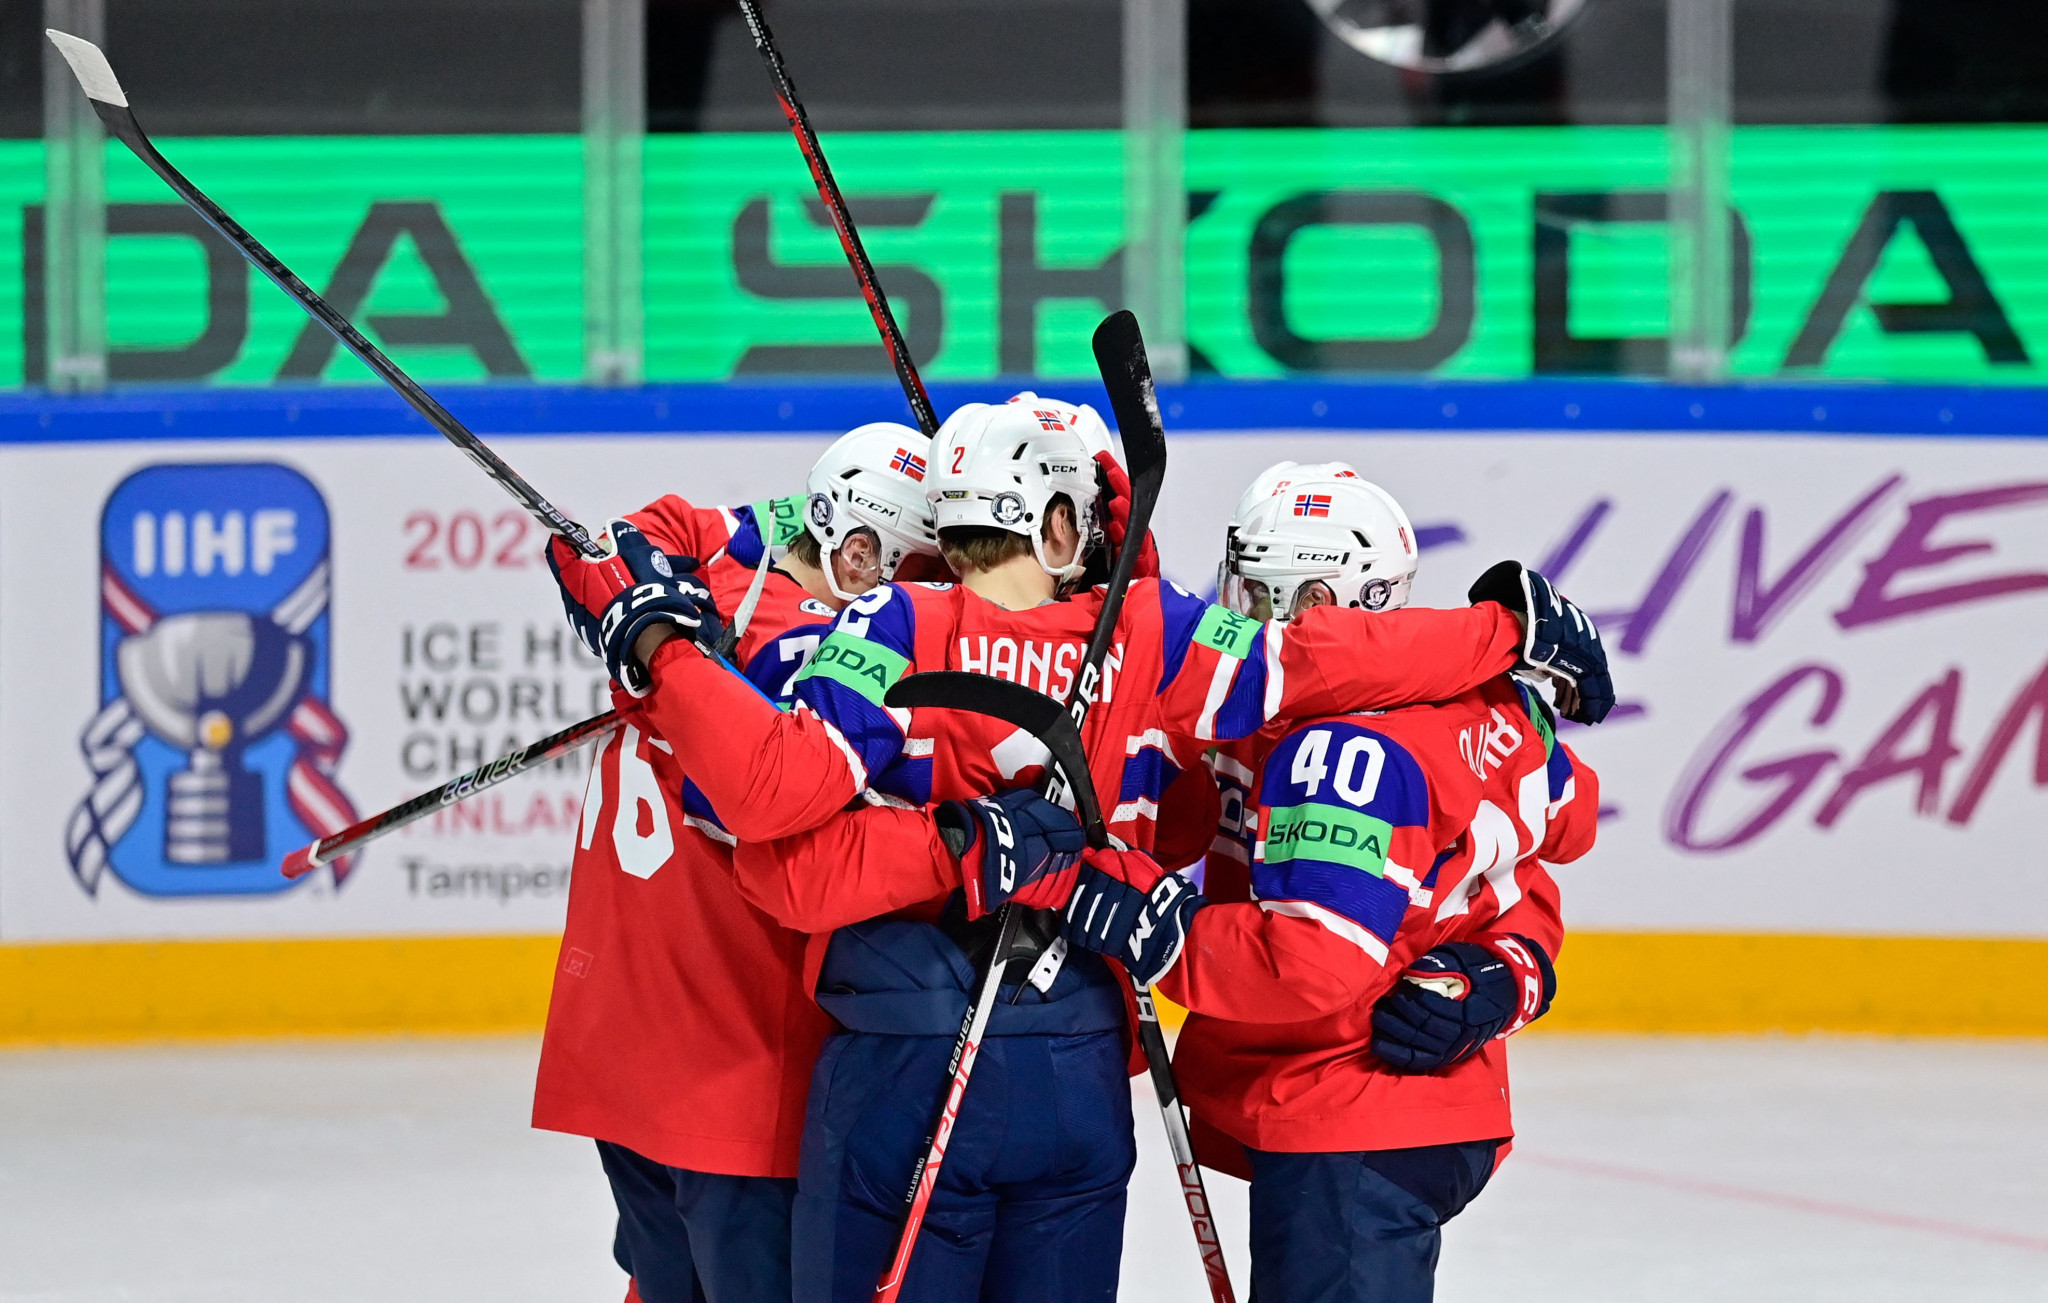 Norway claimed a famous victory over Canada in Riga, their first at the Ice Hockey World Championship for 23 years ©Getty Images